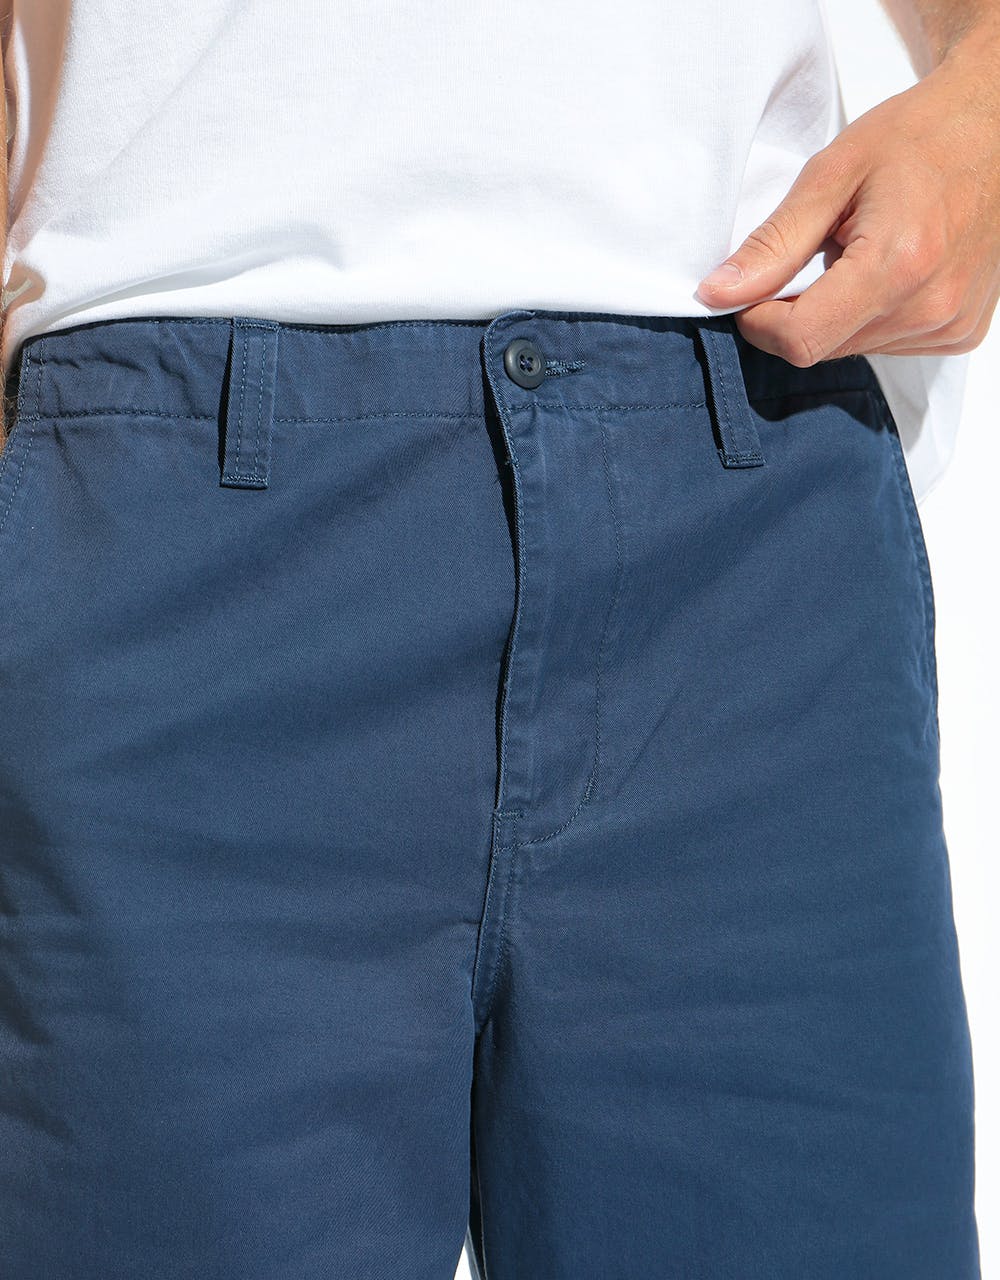 Carhartt WIP Dallas Pant - Blue (Stone Washed)